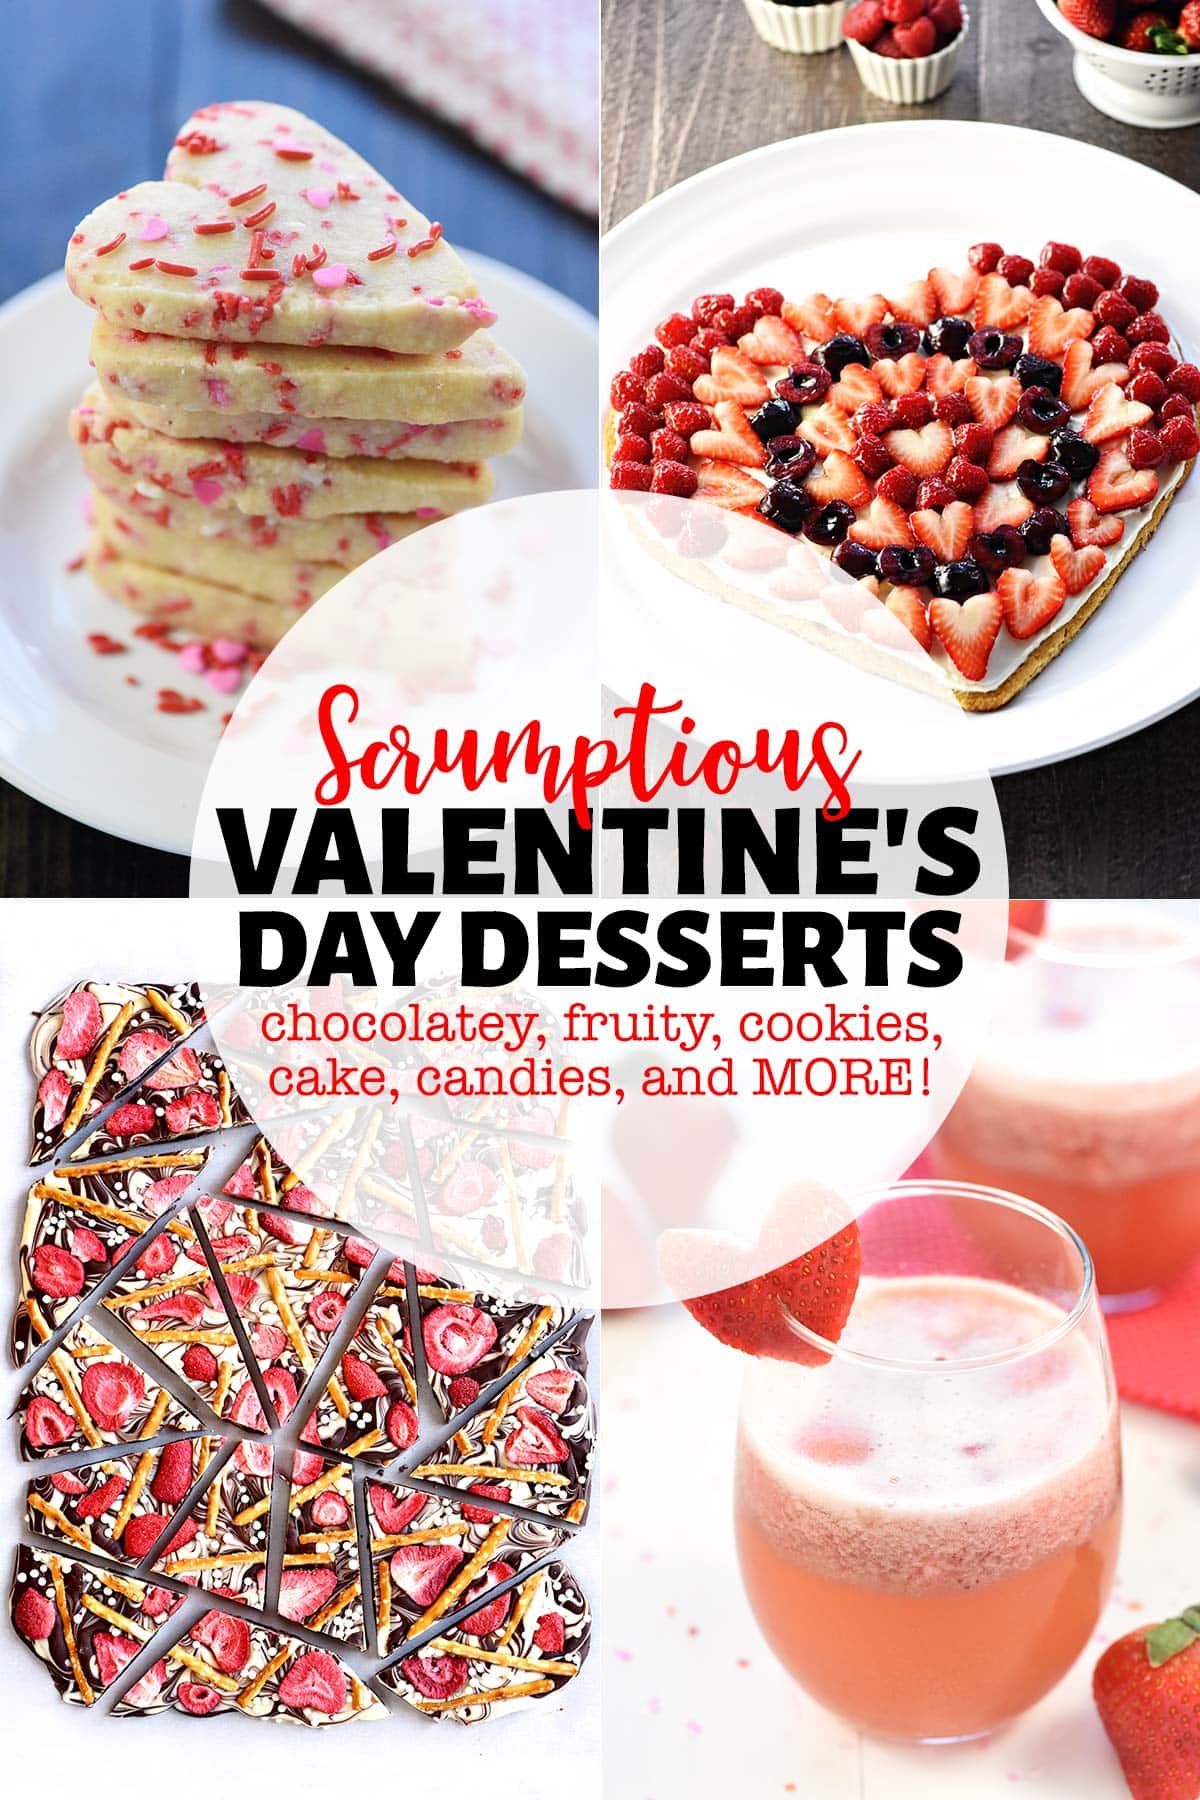 Valentine's Day Desserts, four-photo collage with text showing valentines desserts and other valentines day recipes.